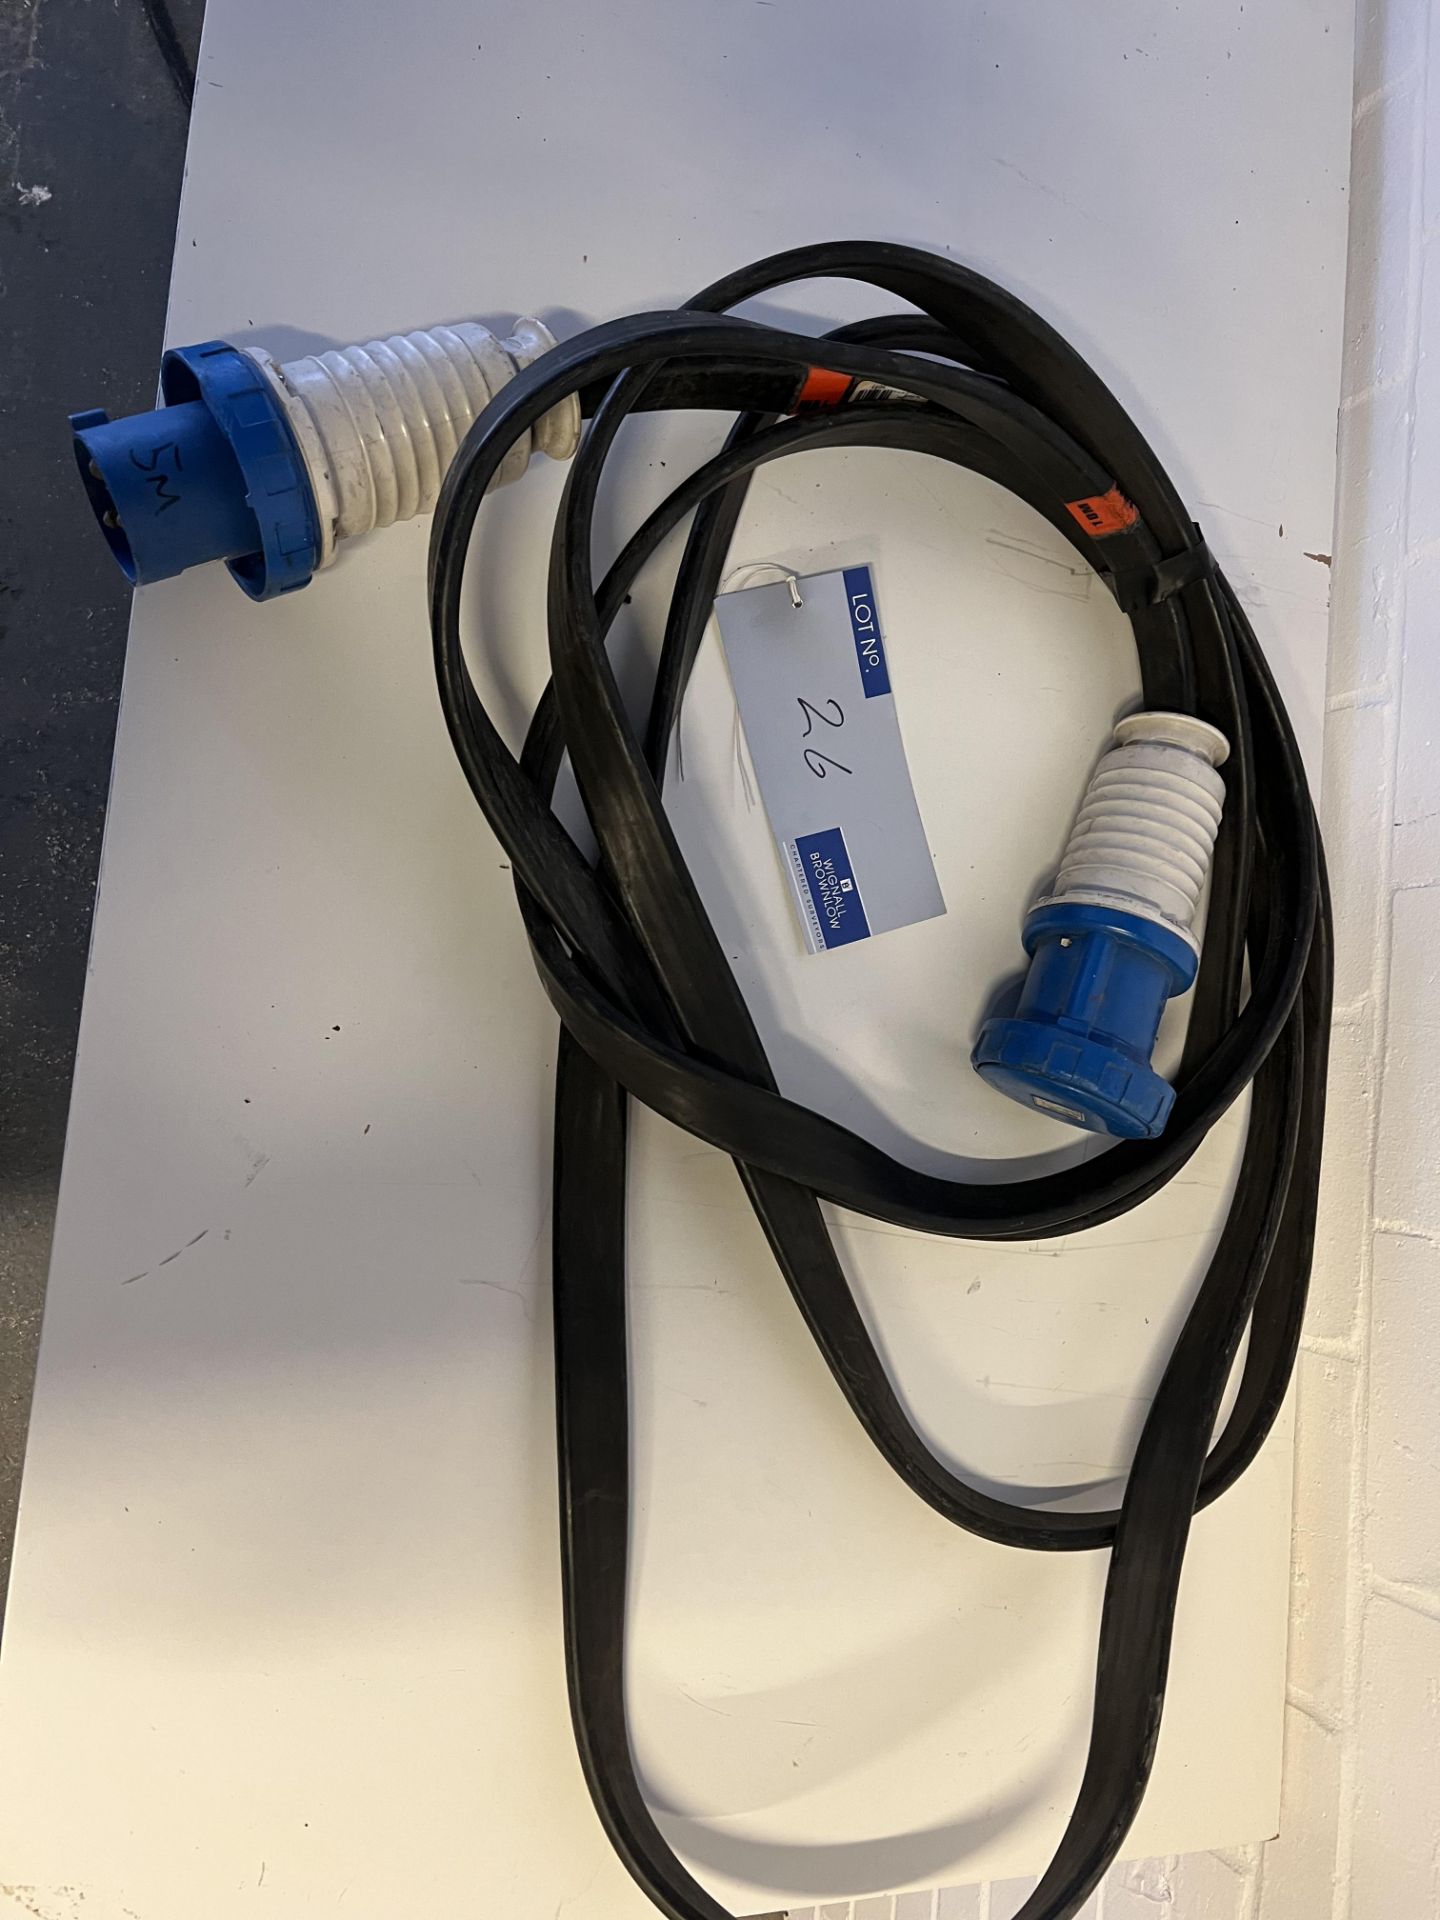 10m 63A 1PH Flat cable (located at Visions, Unit 14, Suttons Business Park, Reading, Berkshire,